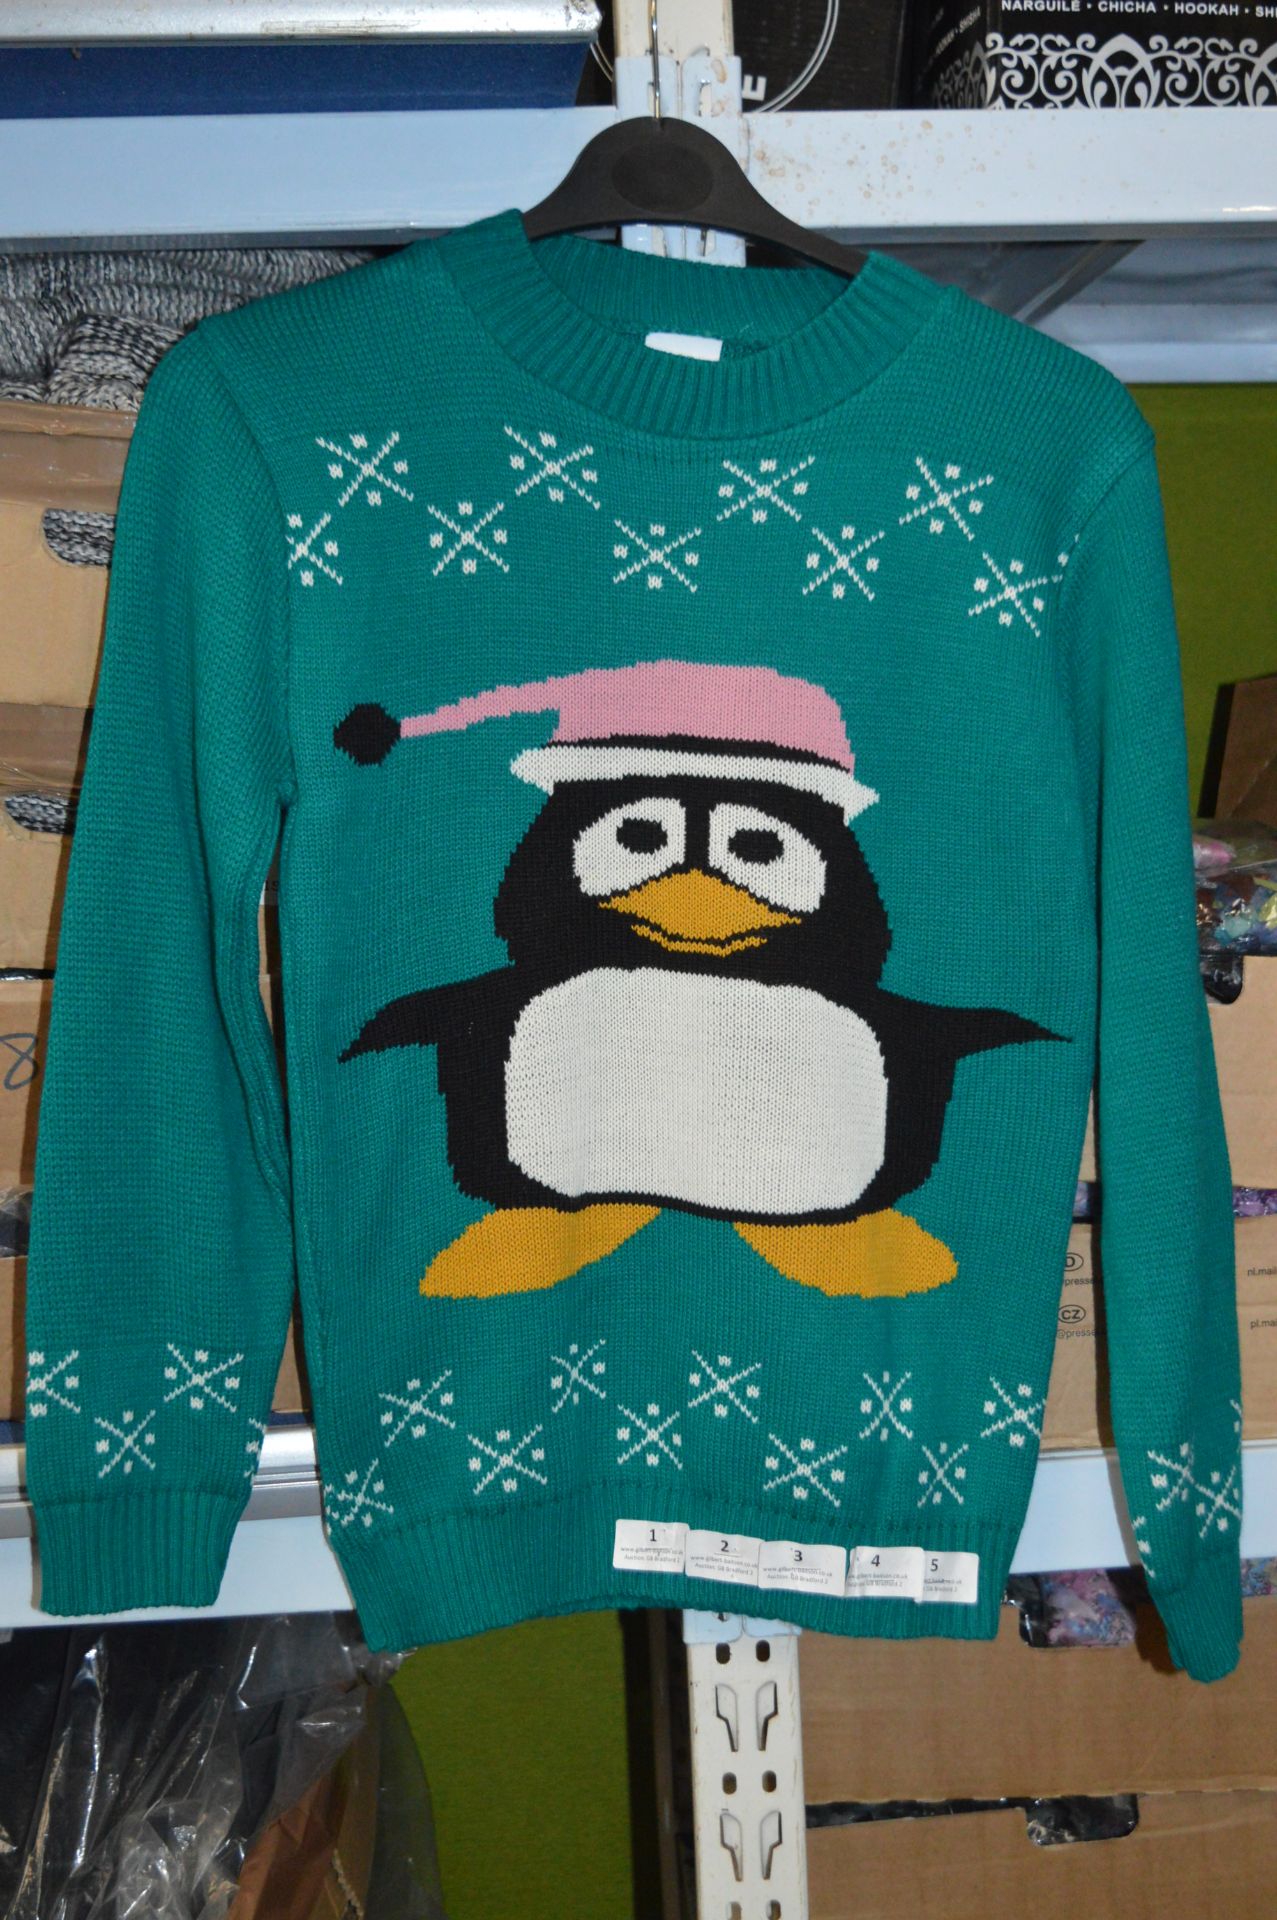 Box of Five Festive Penguin Jumpers